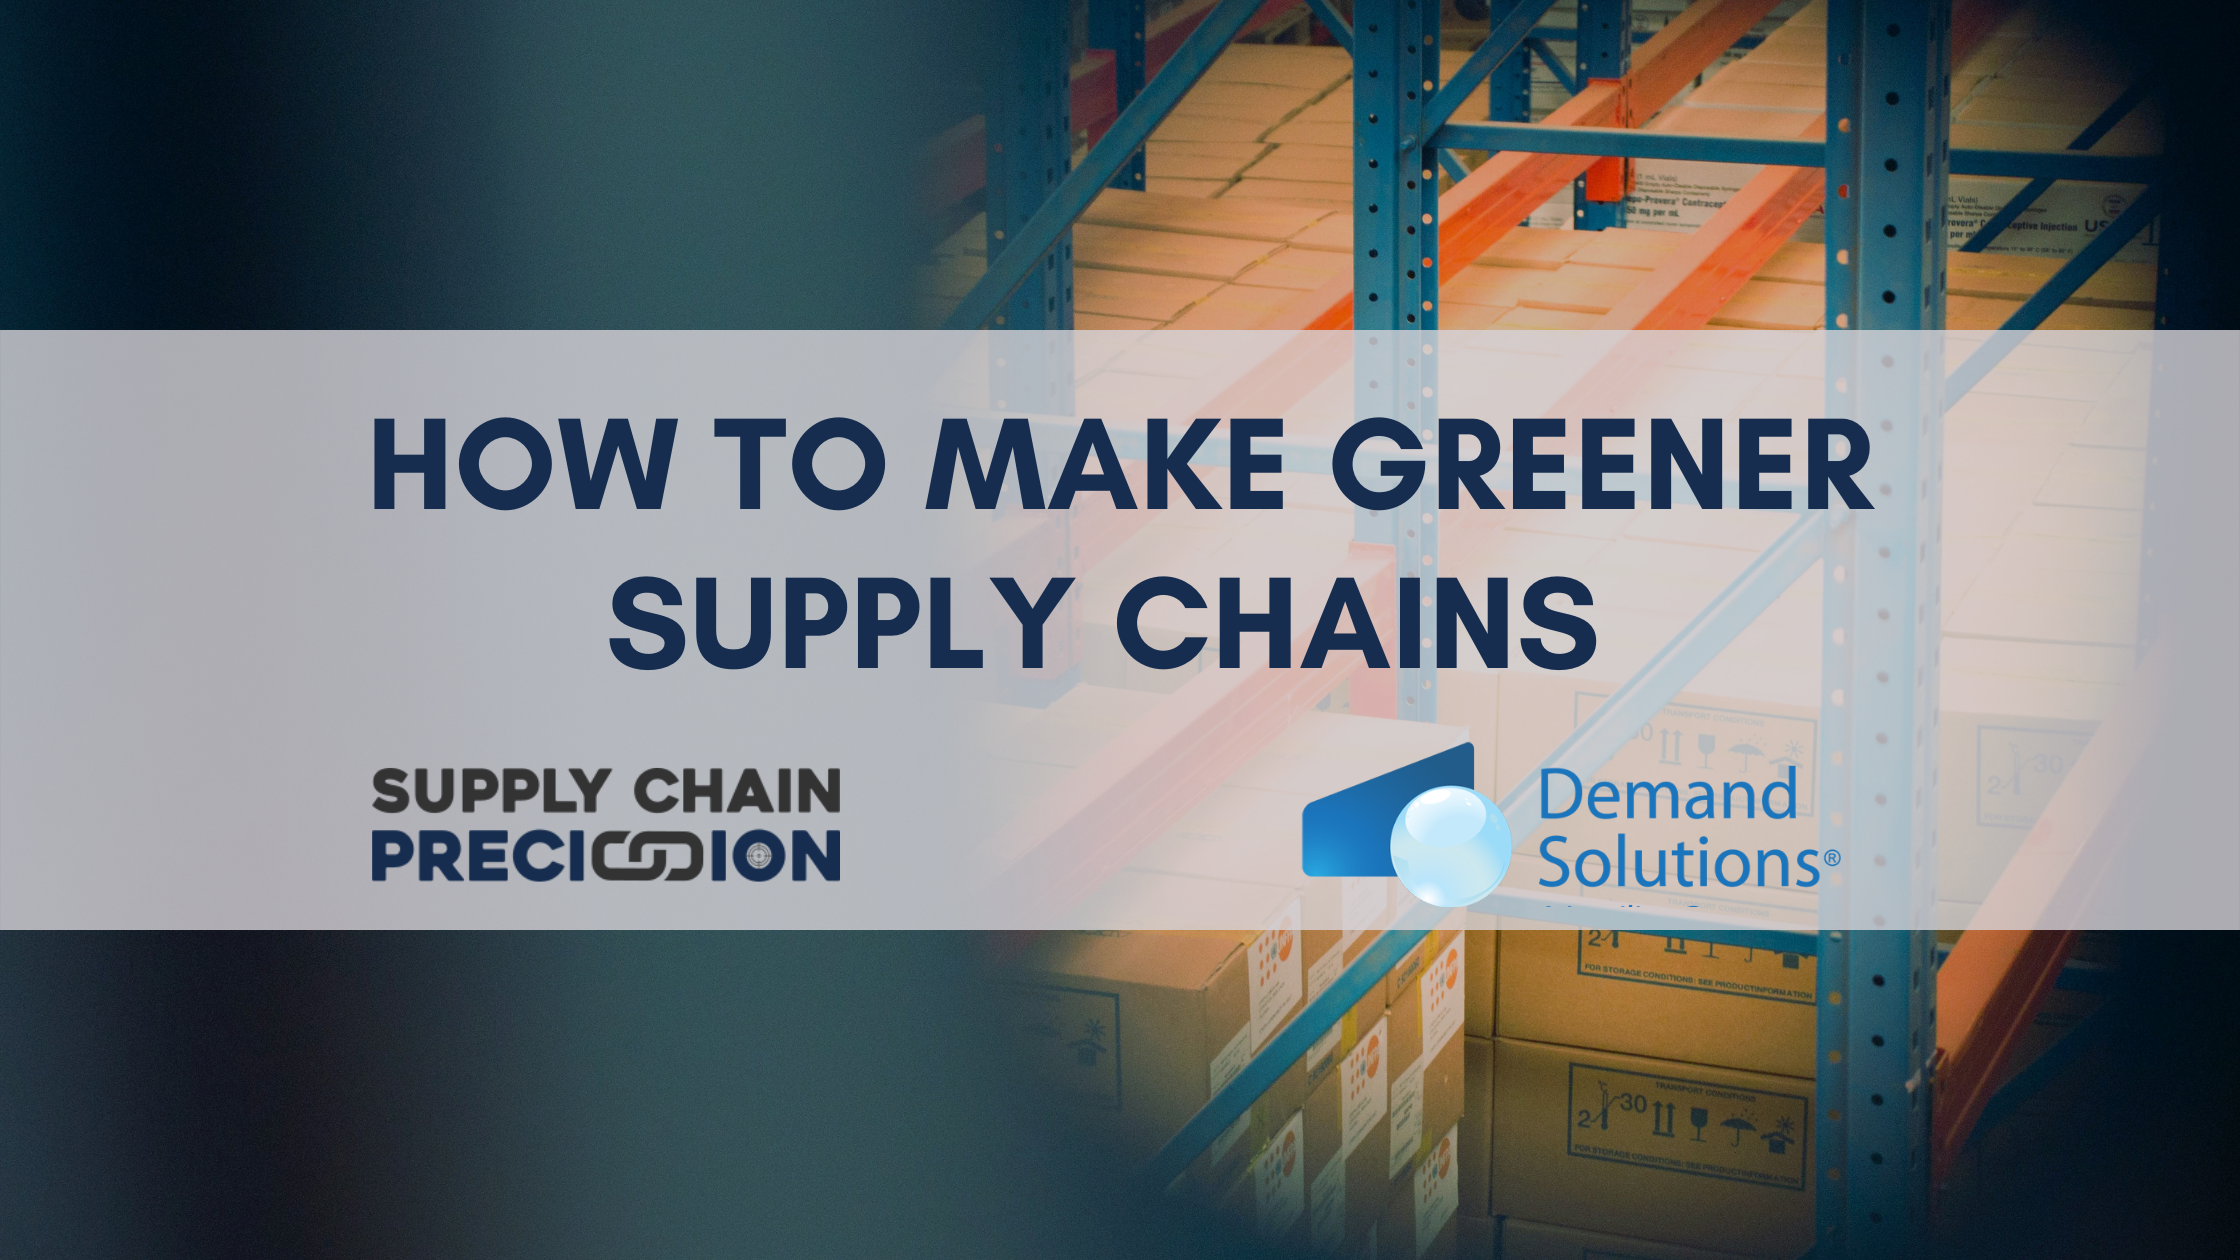 How to make greener supply chains